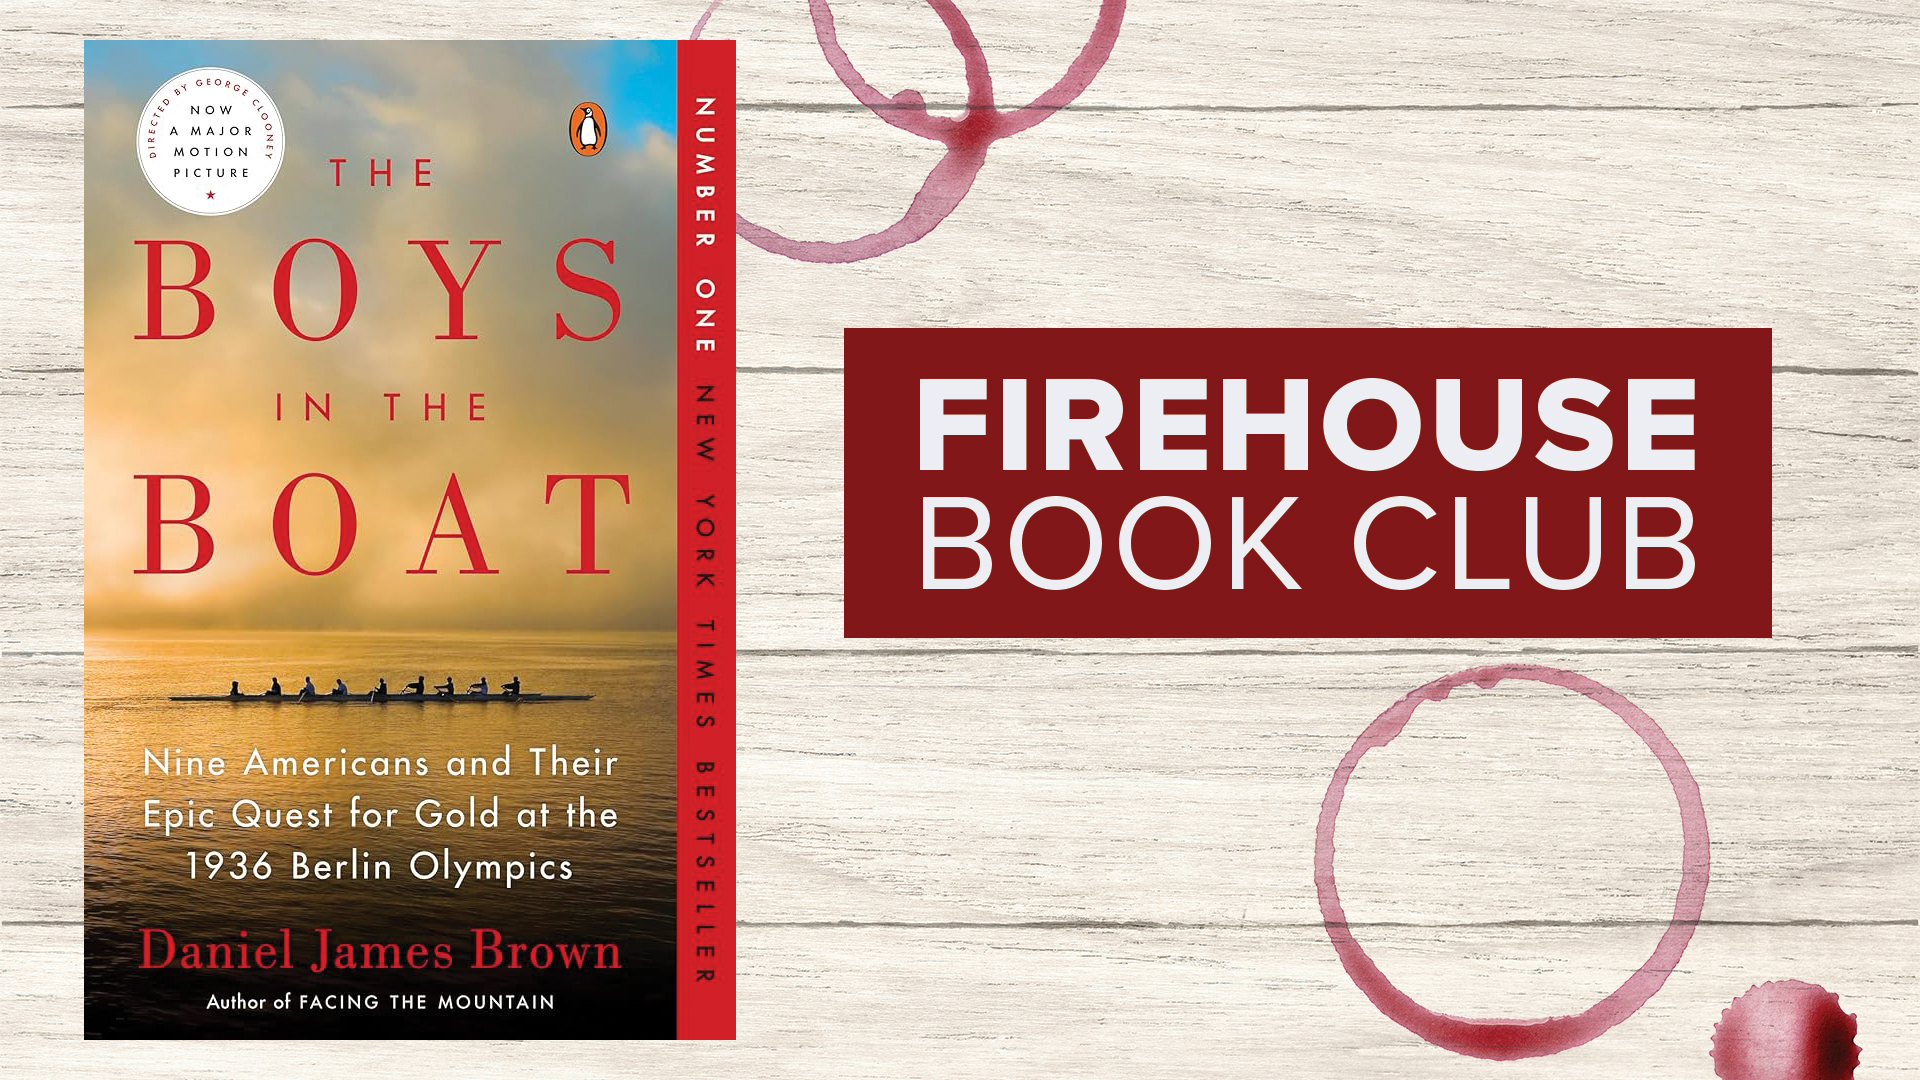 Firehouse Book Club - The Boys in the Boat